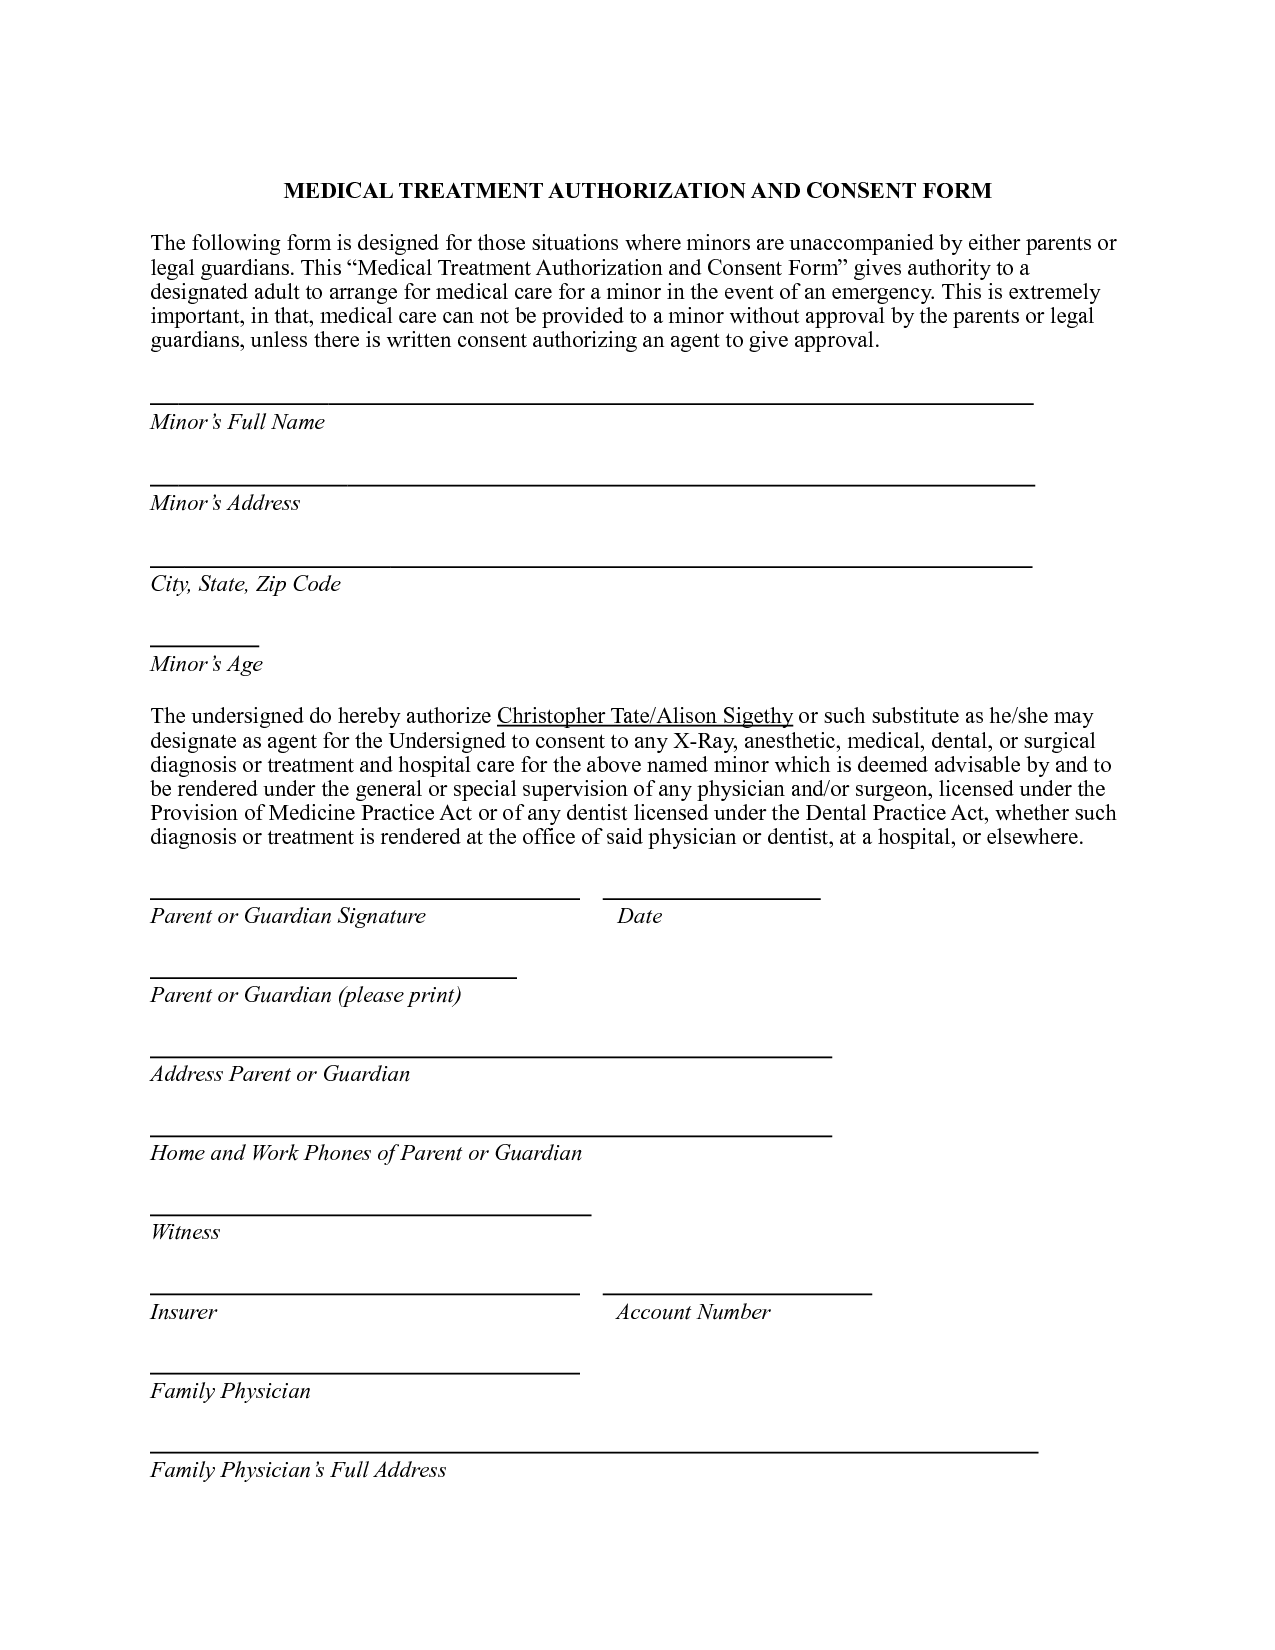 free-medical-release-form-printable-printable-forms-free-online